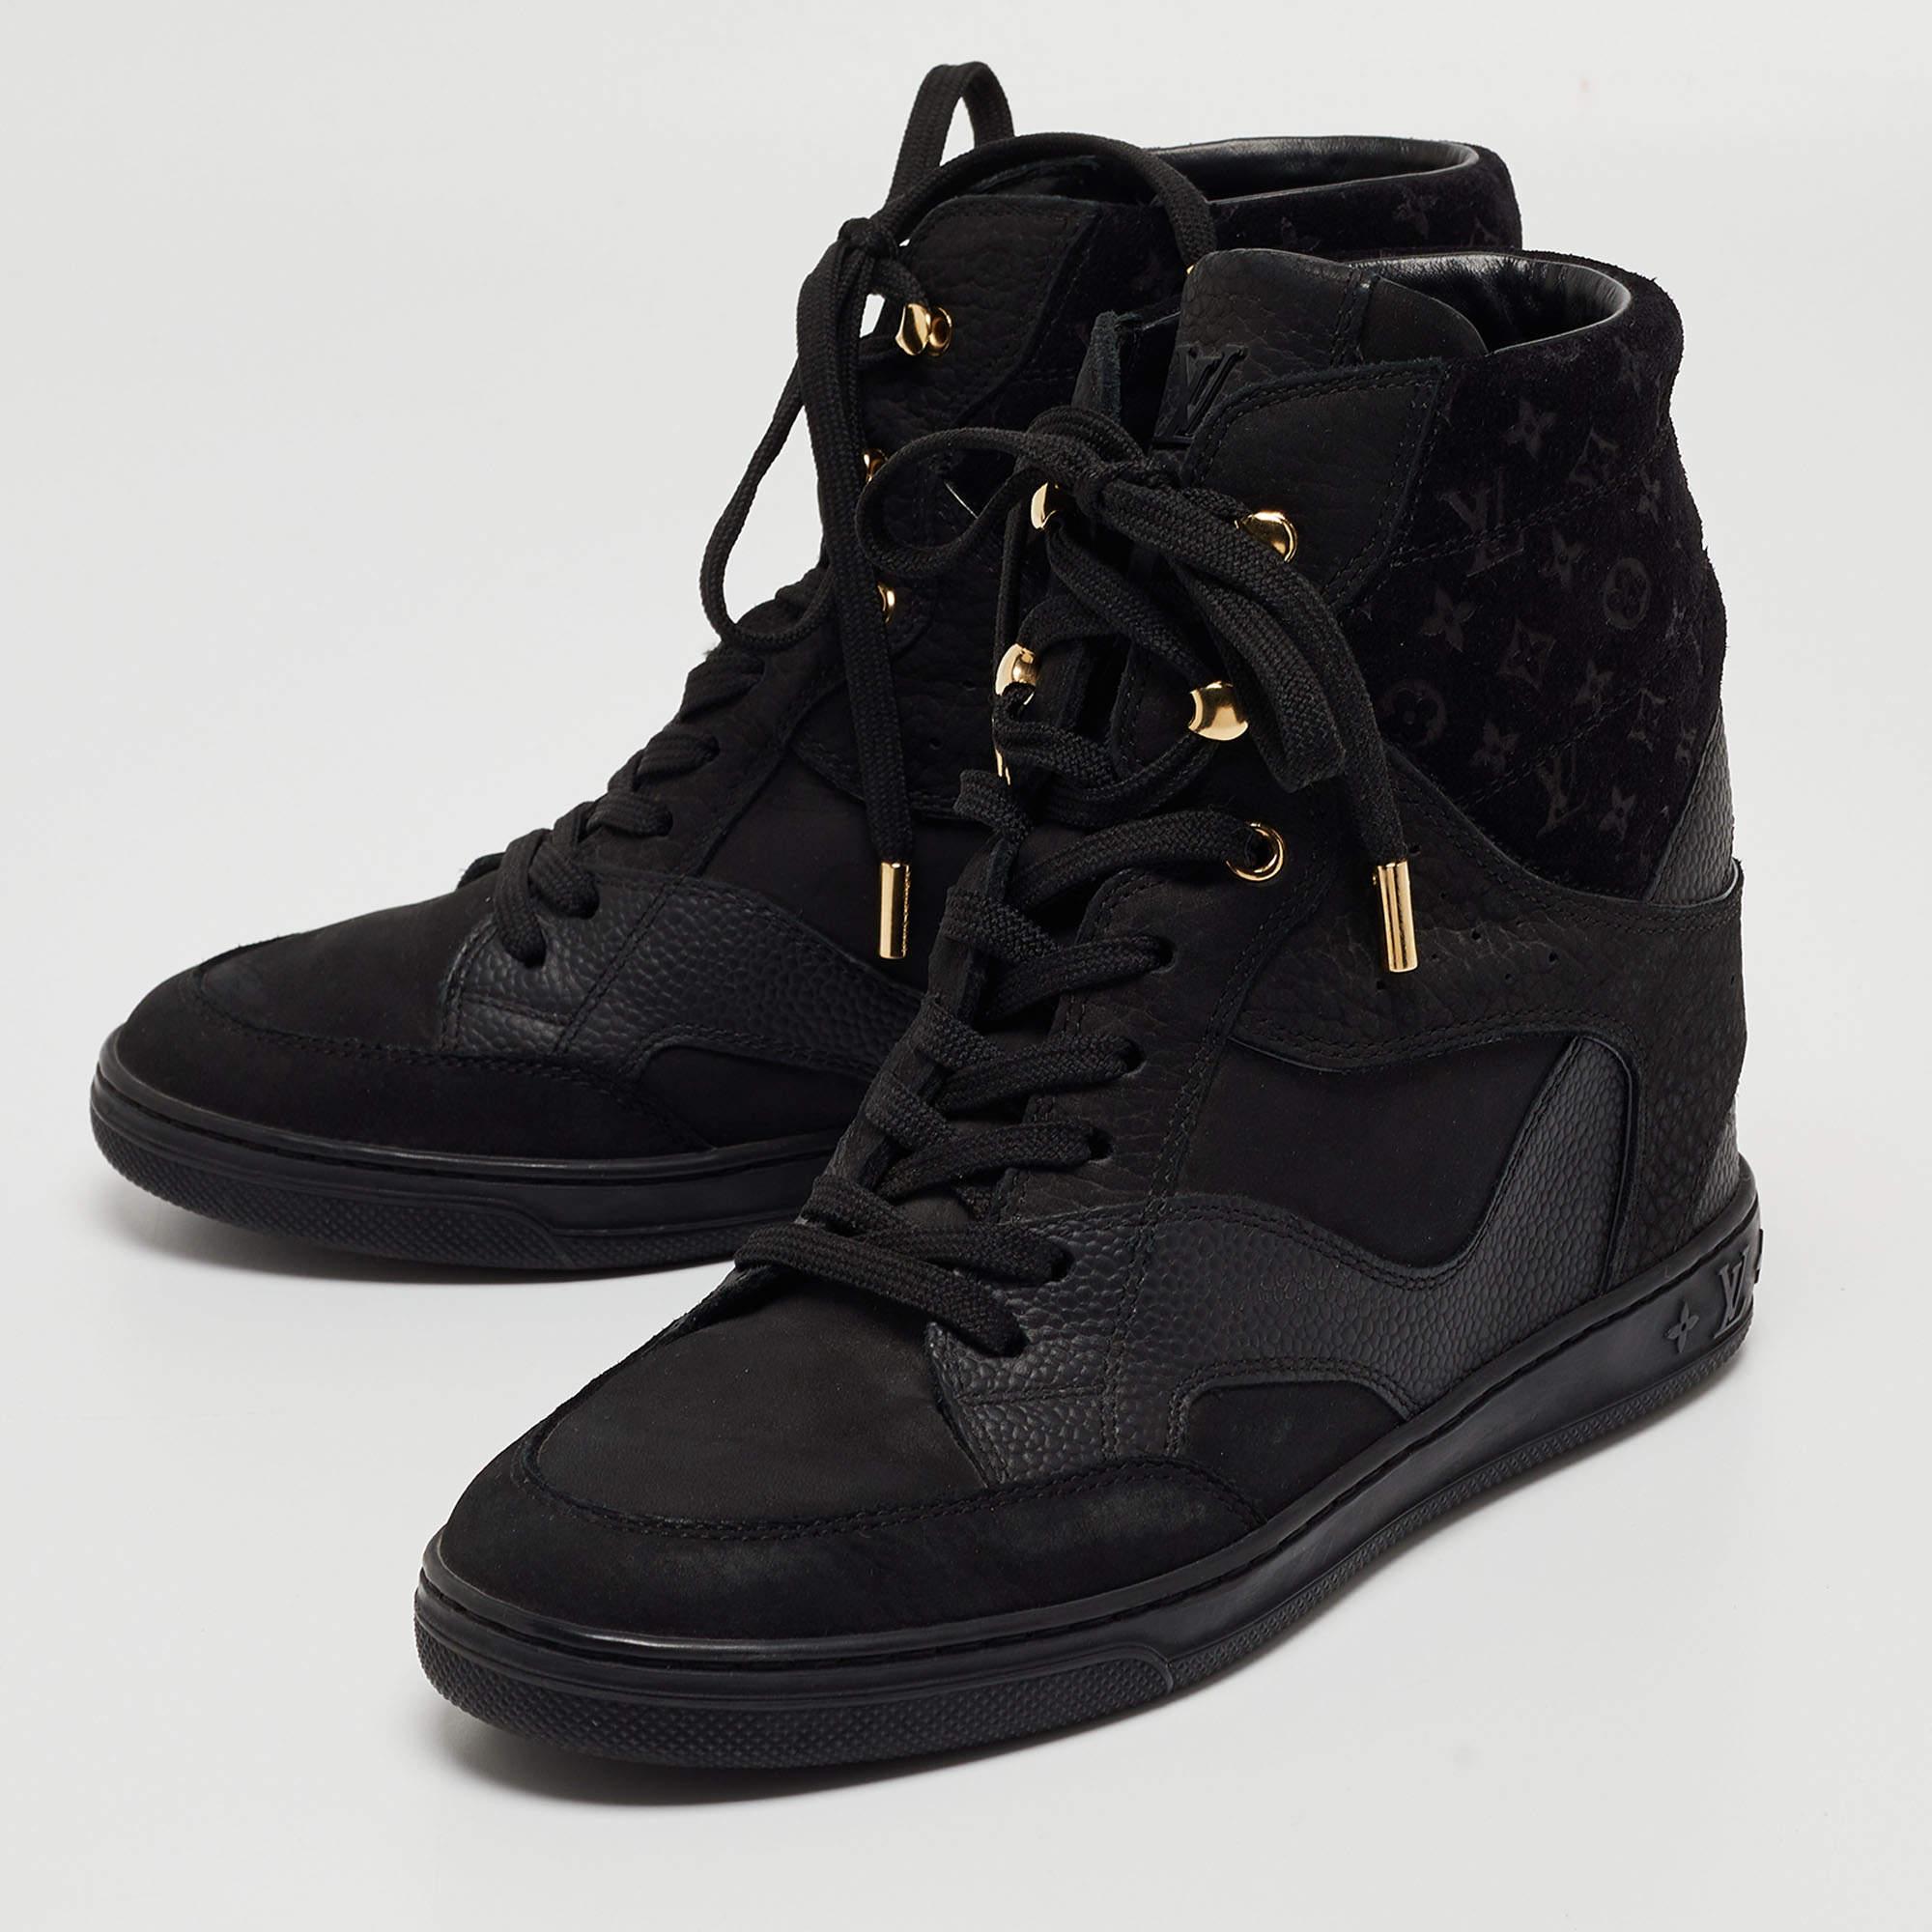 Louis Vuitton Black Leather and Monogram Suede Cliff Wedge Sneakers Size 37 For Sale 4